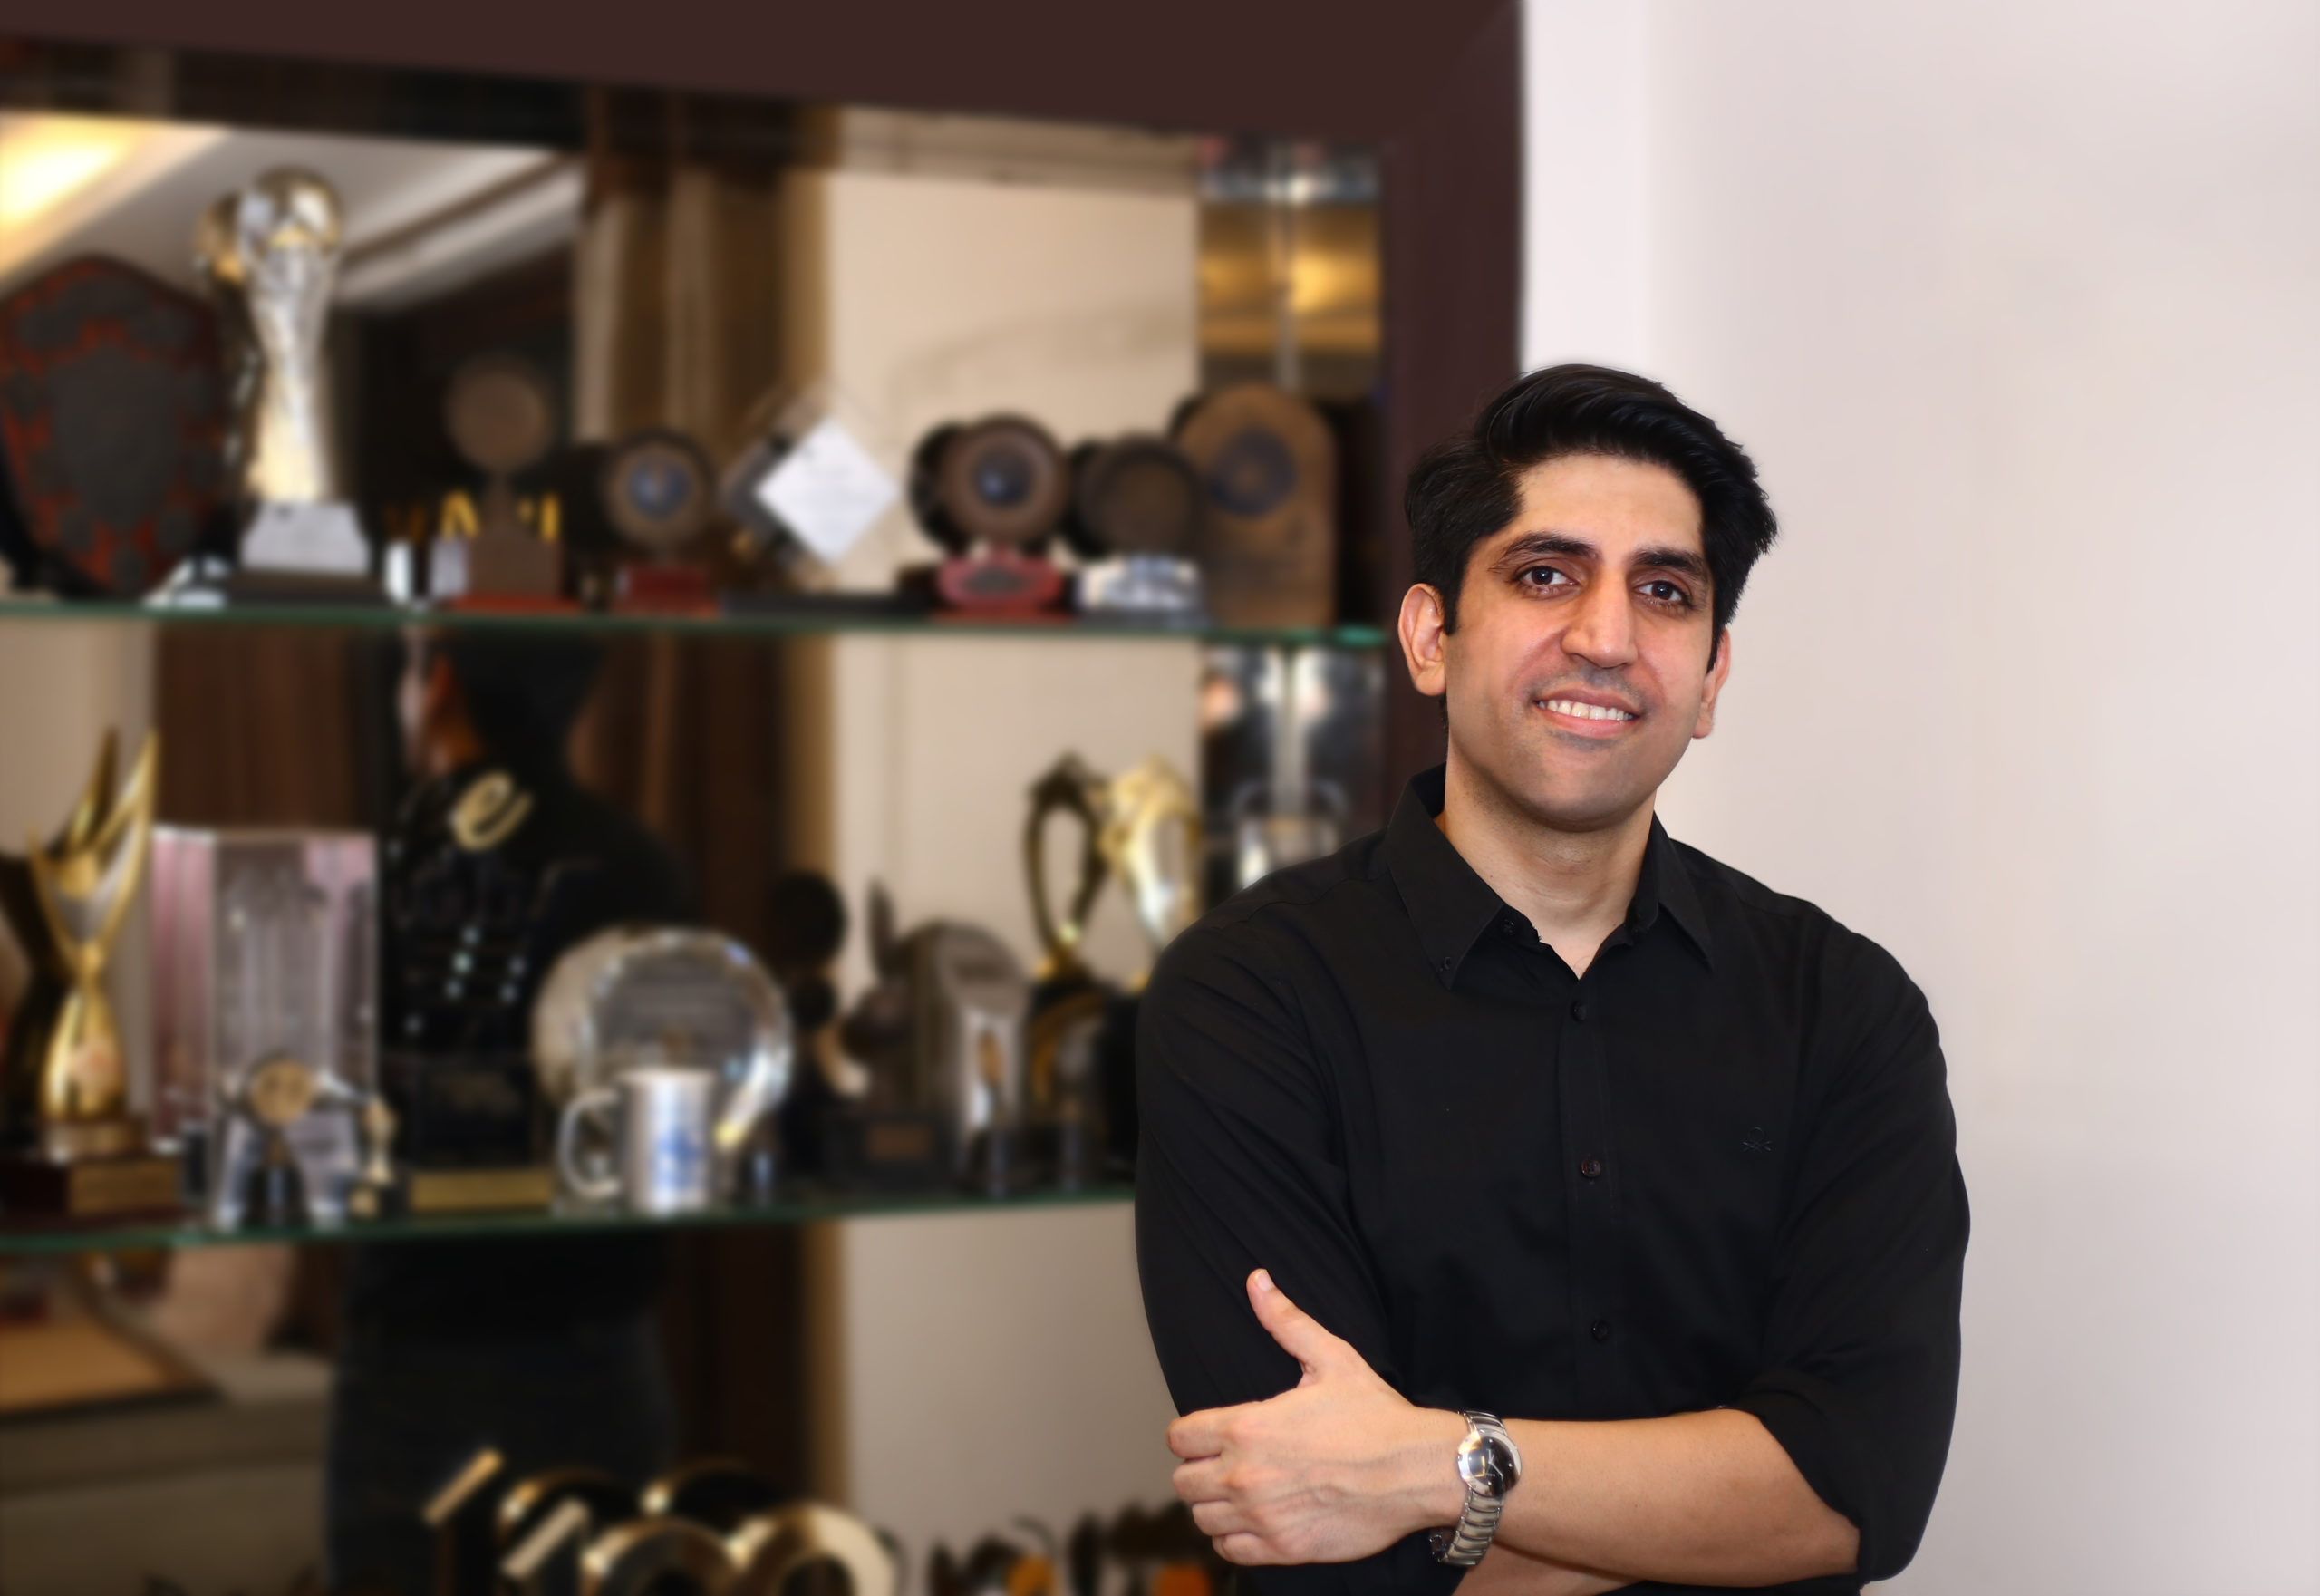 Exclusive: An Interview with Mr. Rohit Chadda, CEO of Zee Digital